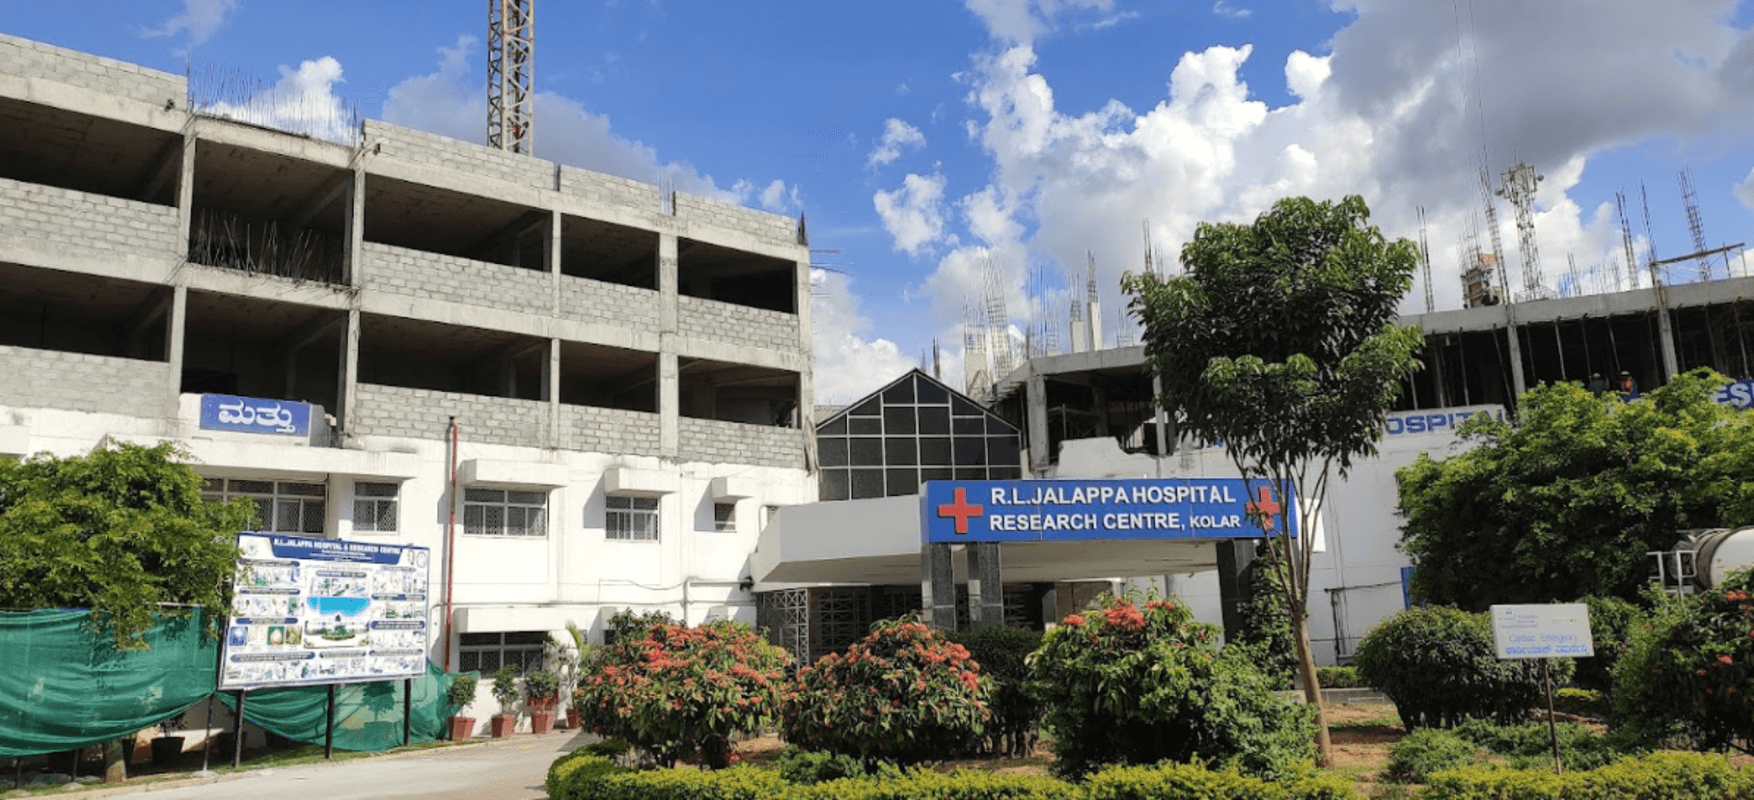 R L Jalappa Hospital & Research Centre